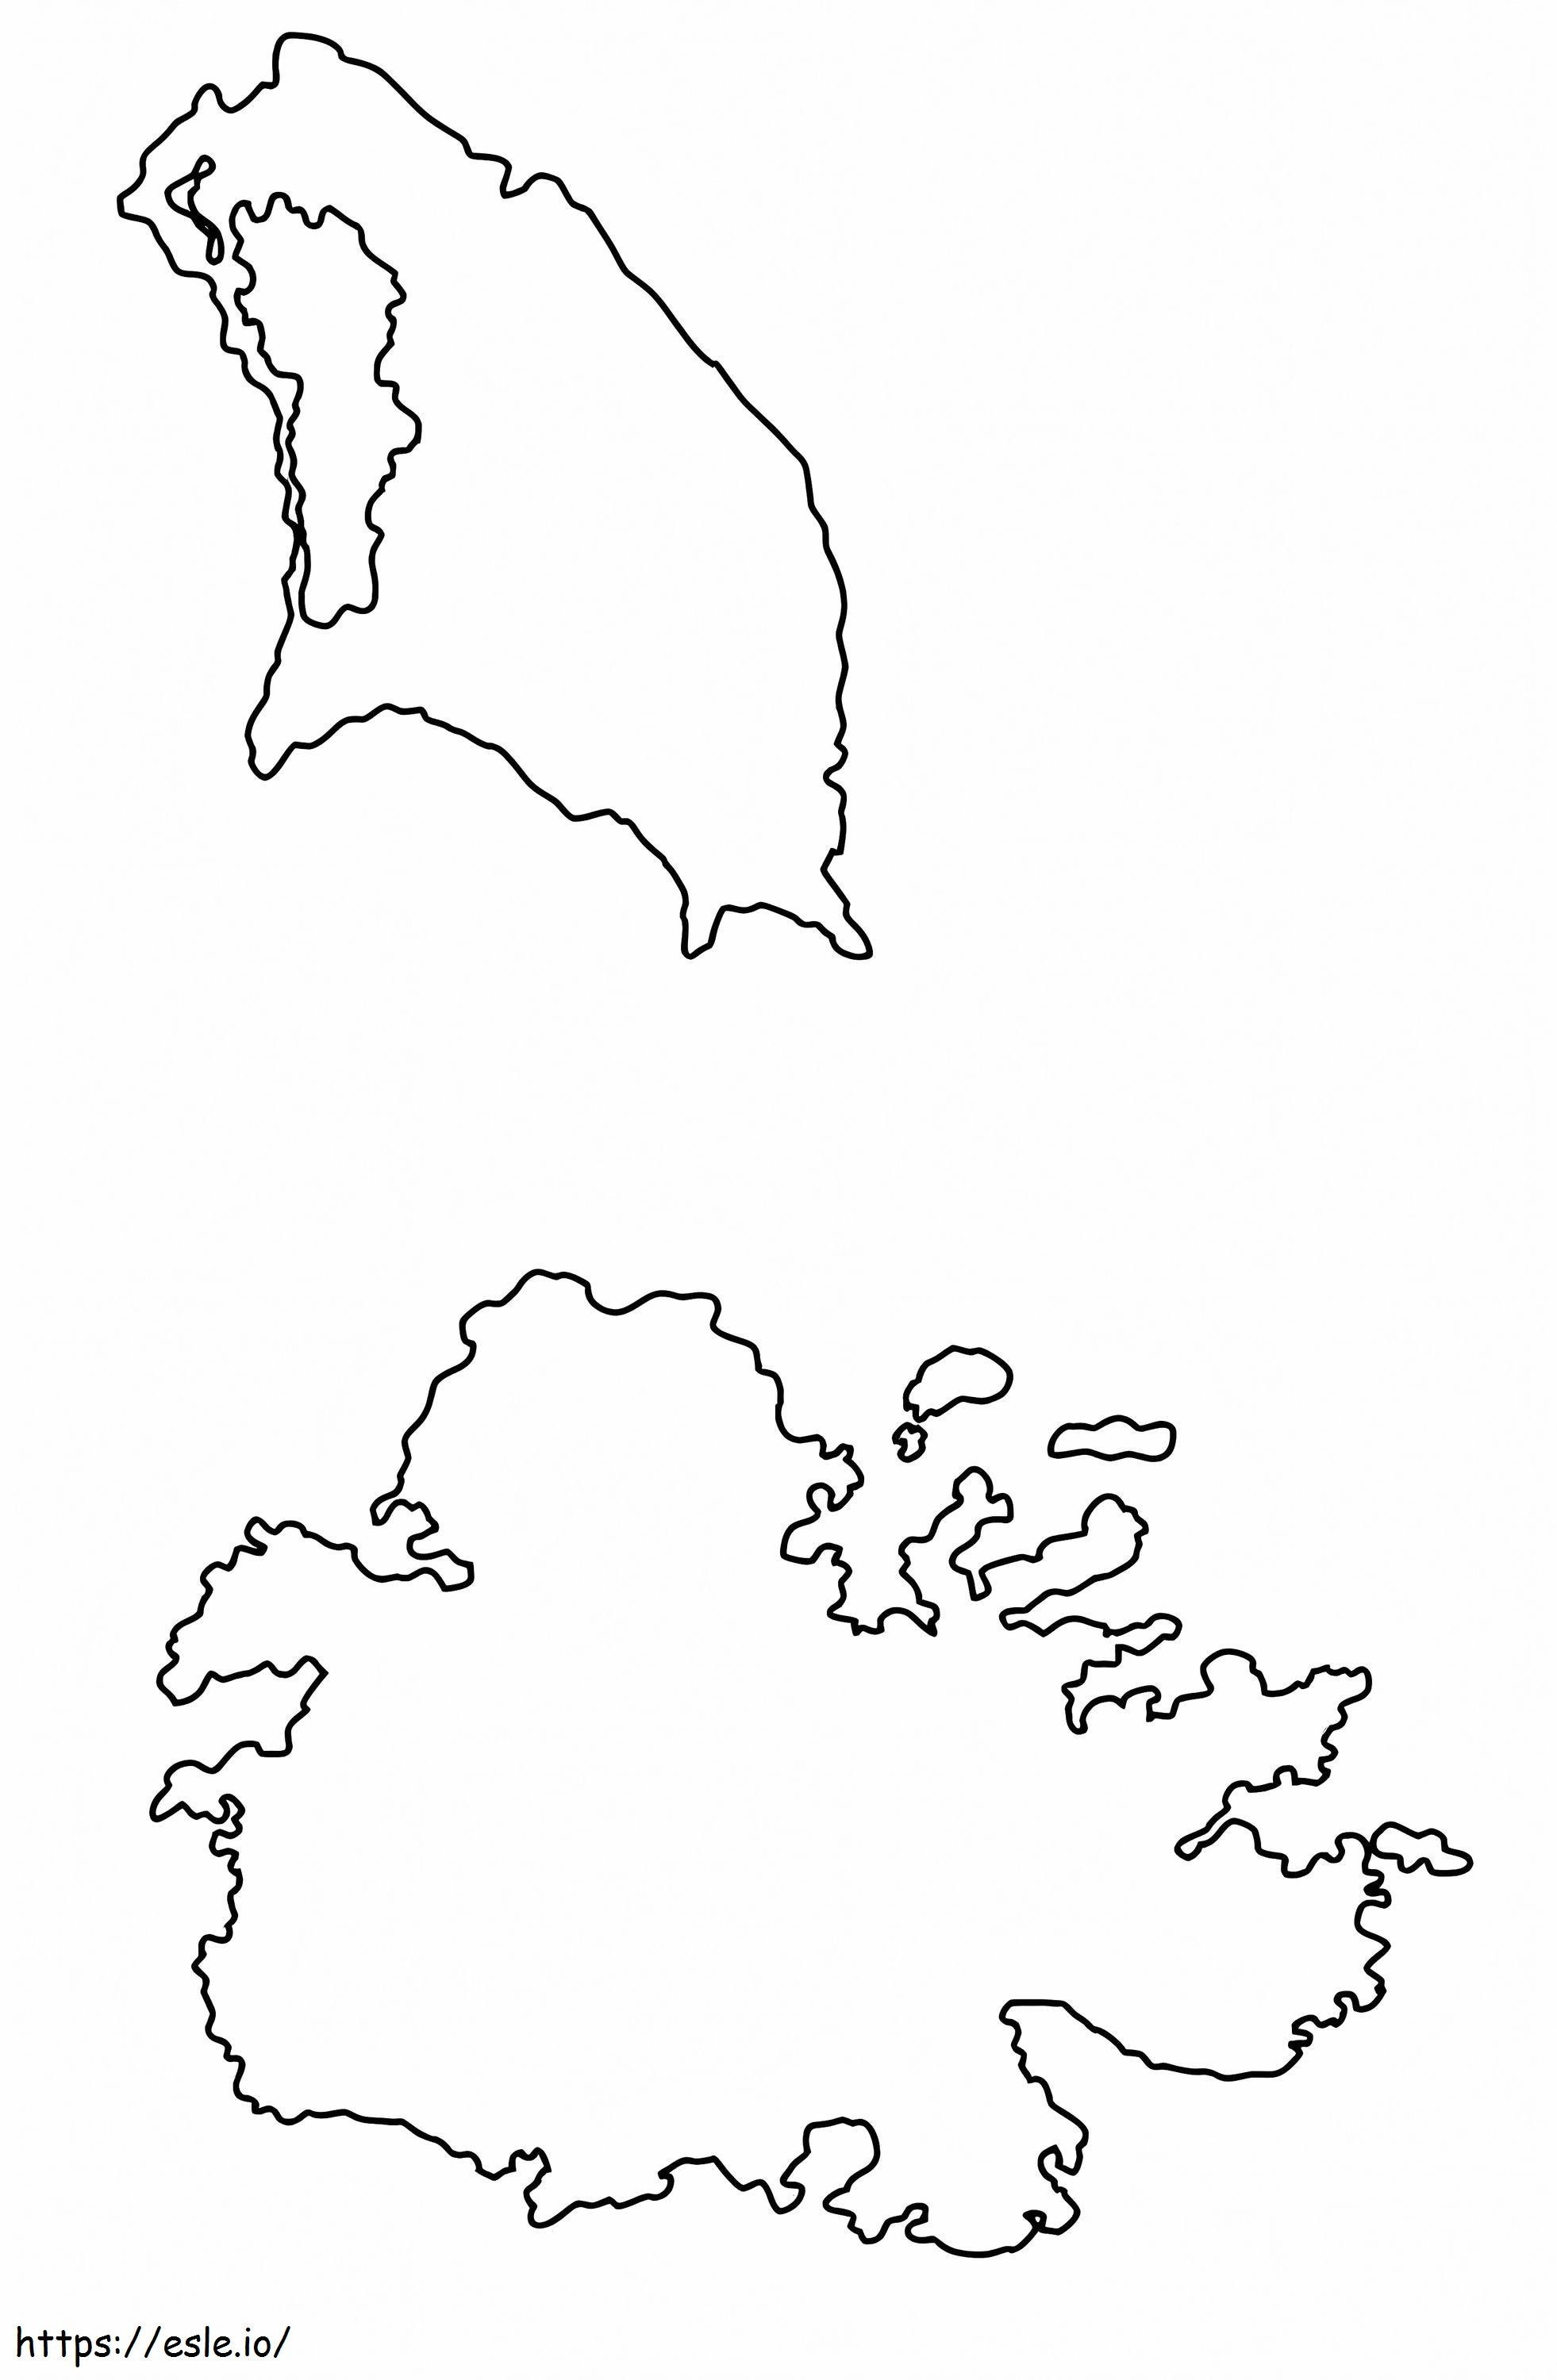 Antigua And Barbuda Outline Map coloring page